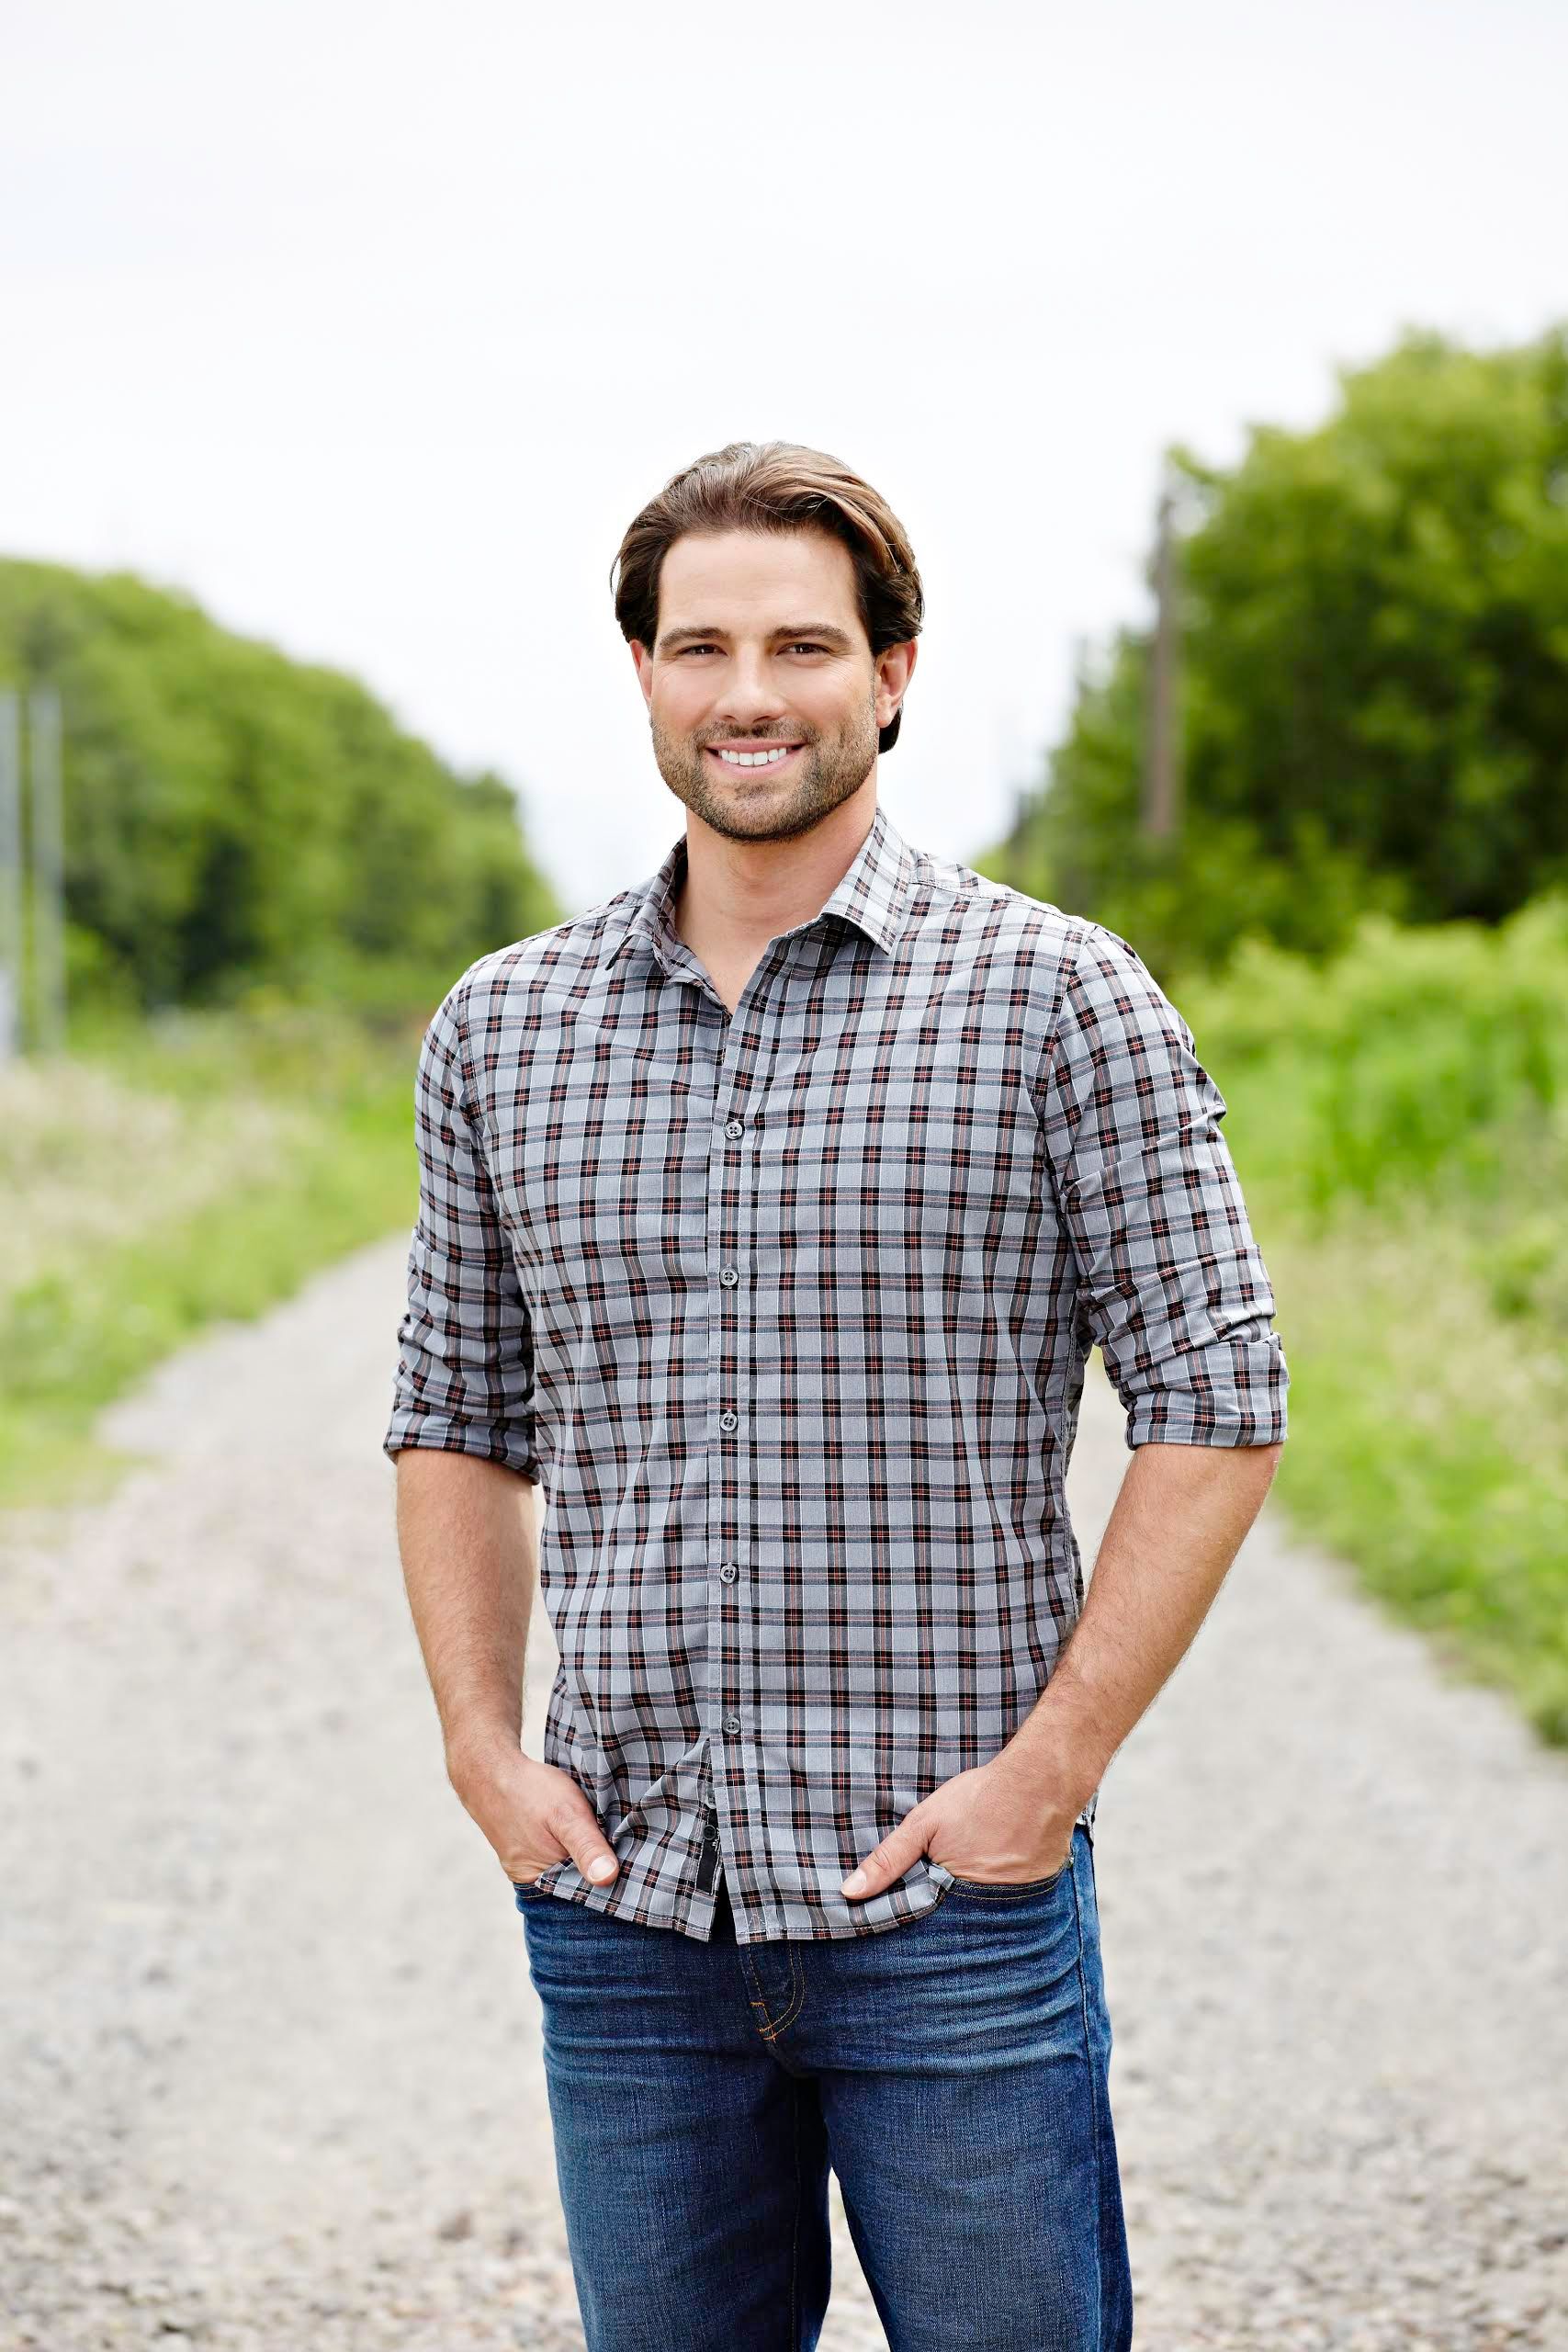 10 Things You Didn't Know About HGTV Star Scott McGillivray - Fame10